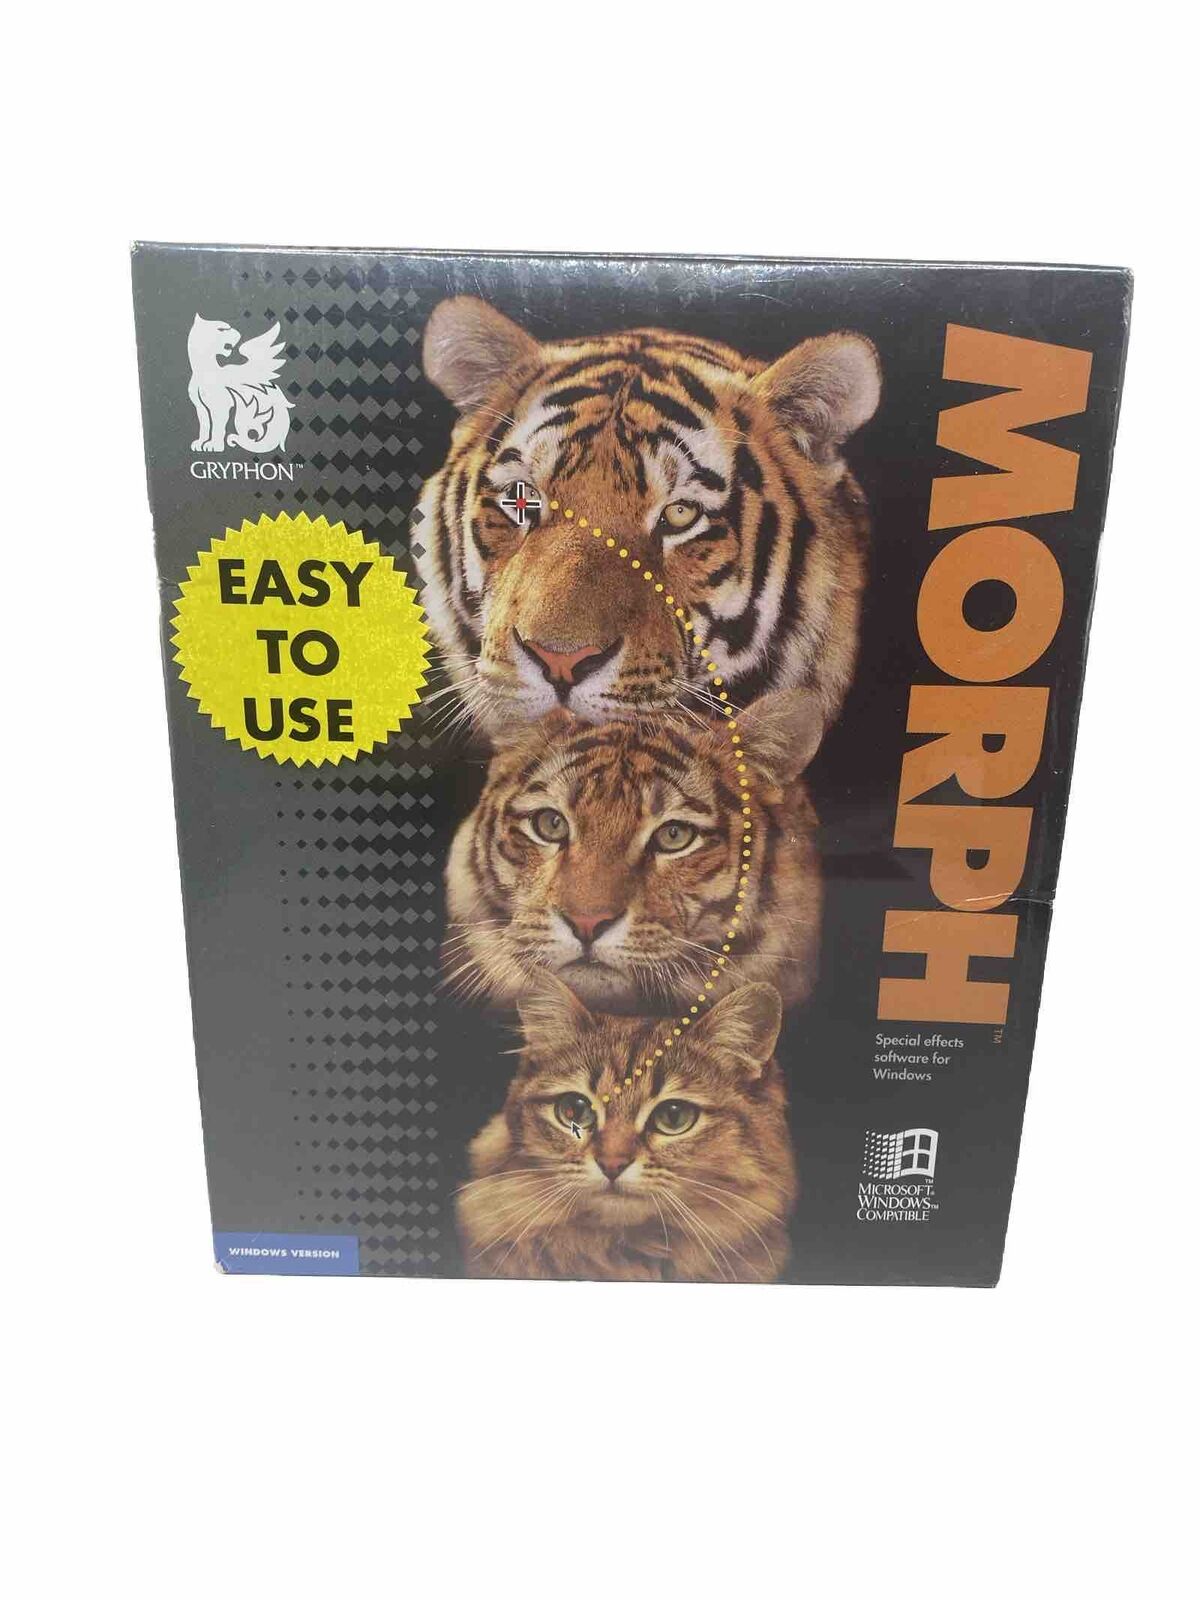 Morph Special Effects Software - Windows Version PC Big Box Gryphon - New / Seal